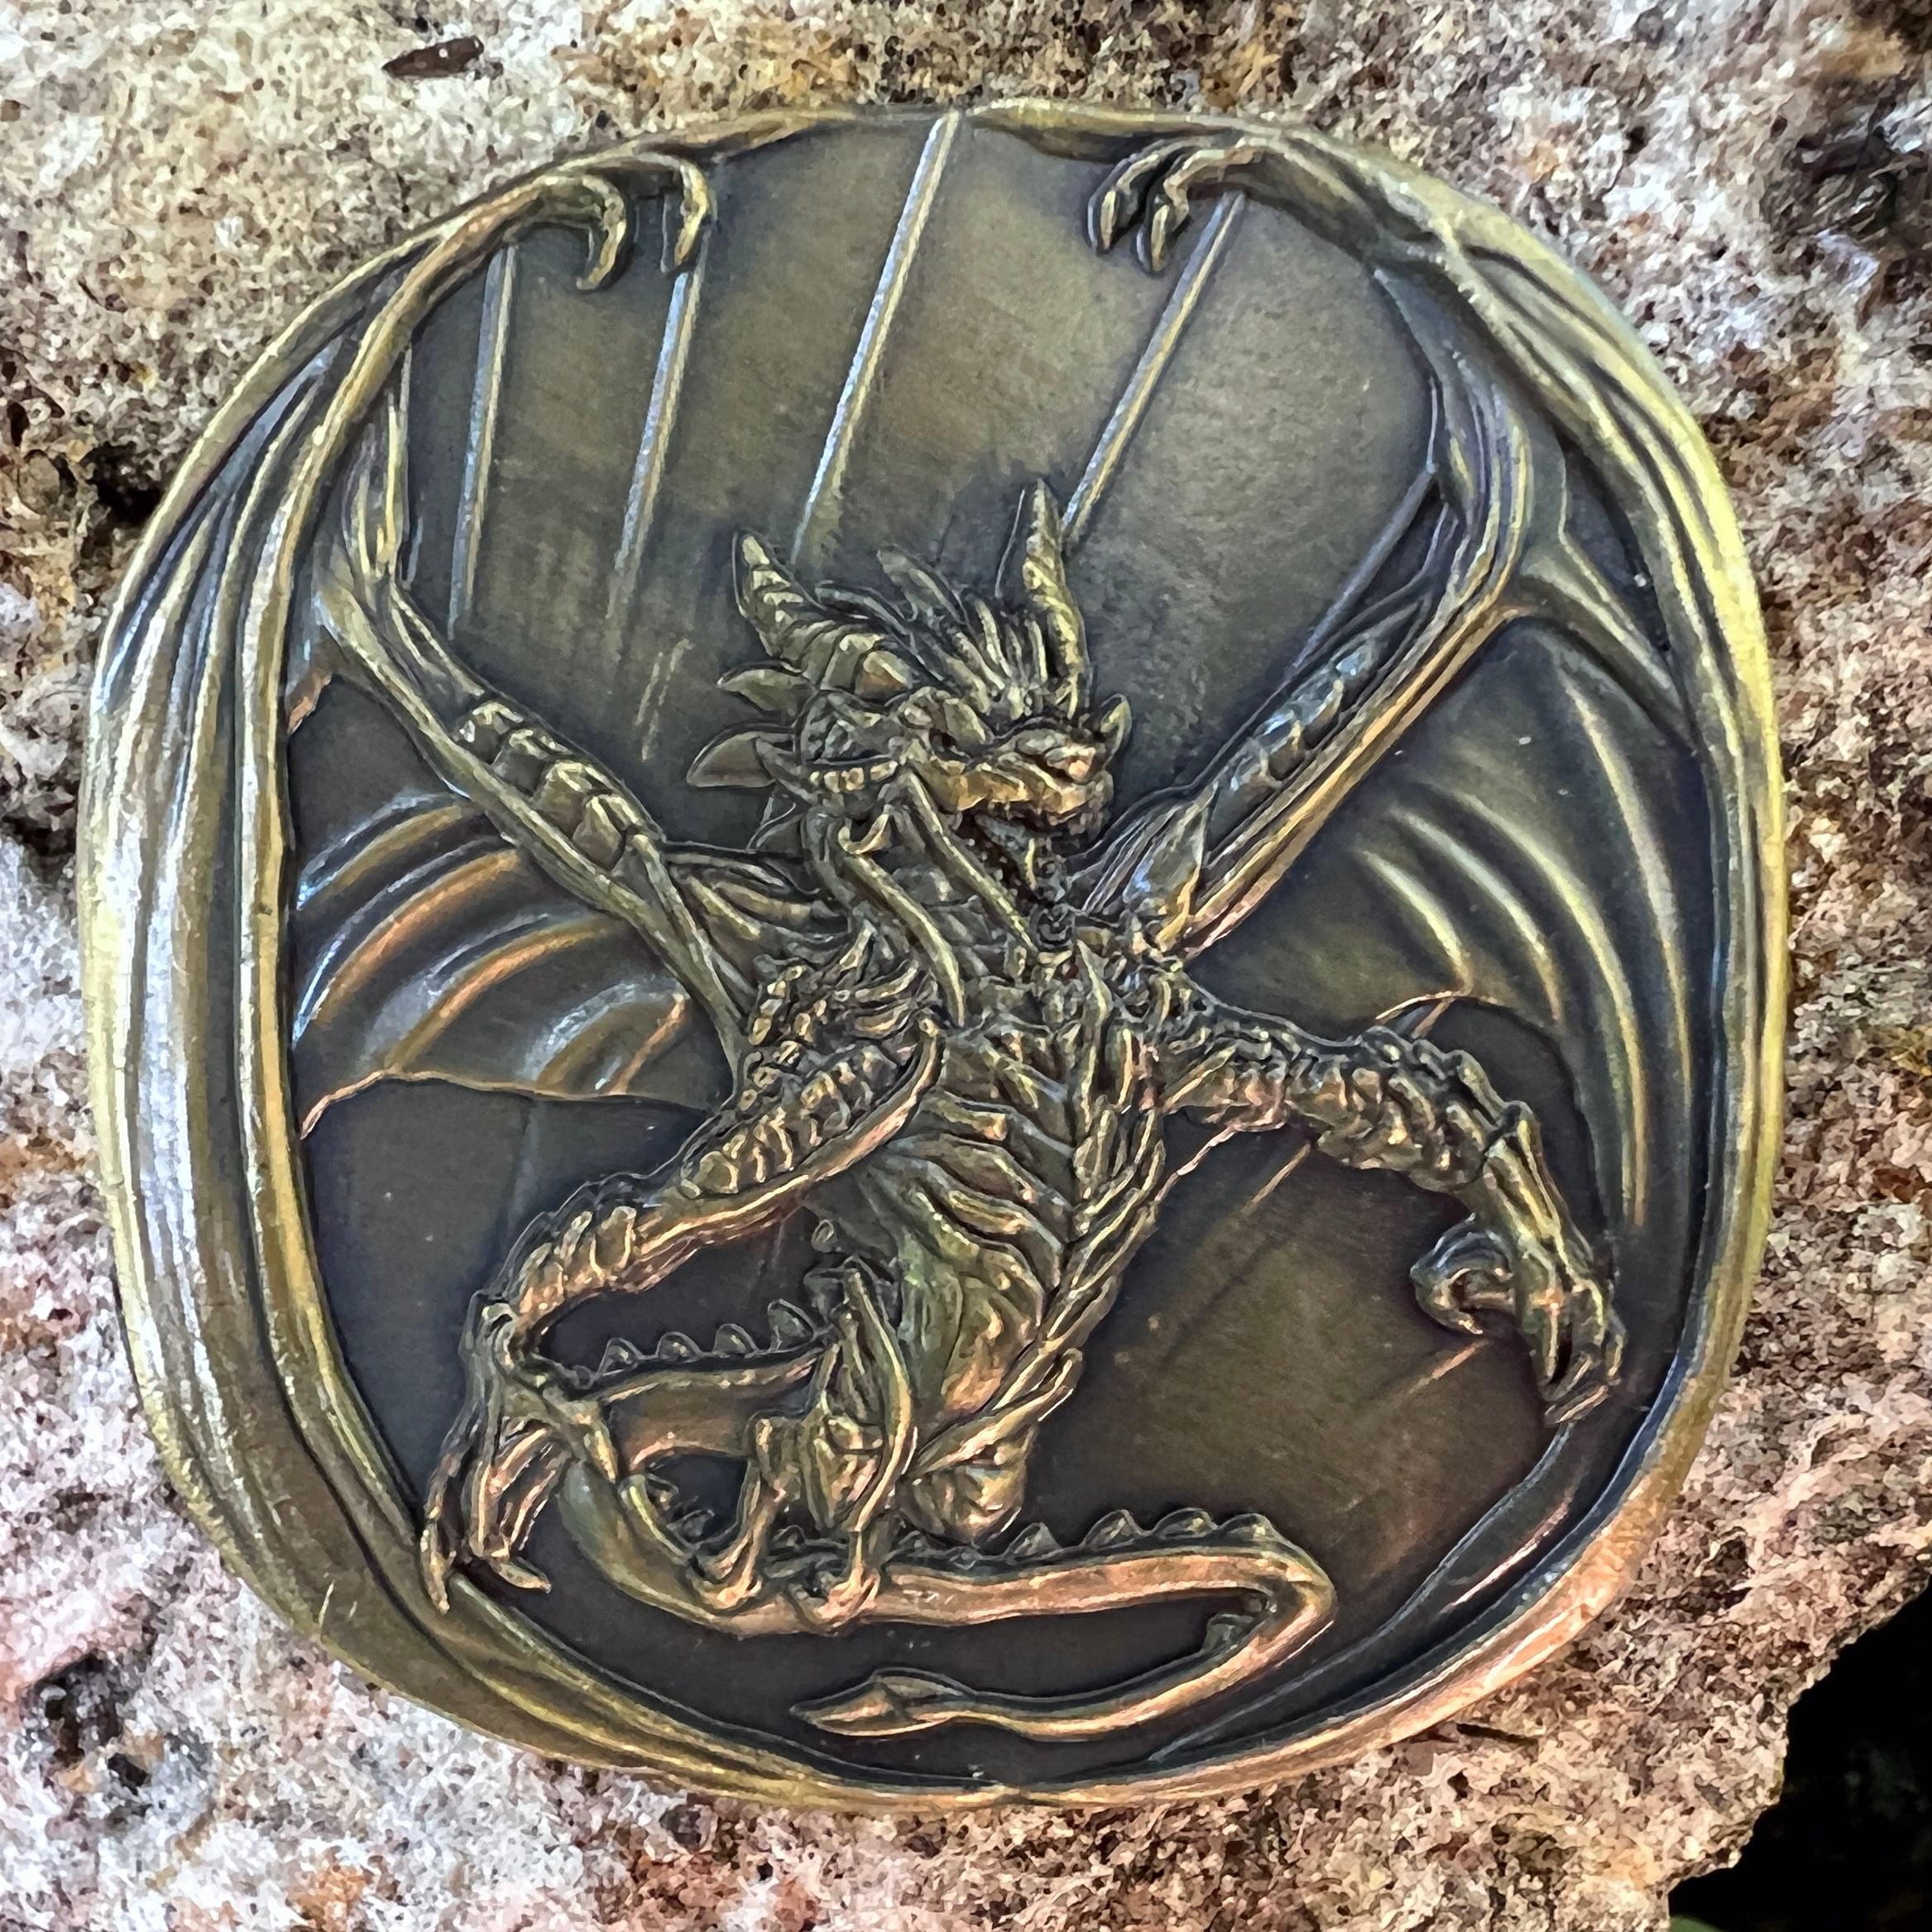 Adventure Coins - Dragon Metal Coins Set of 10